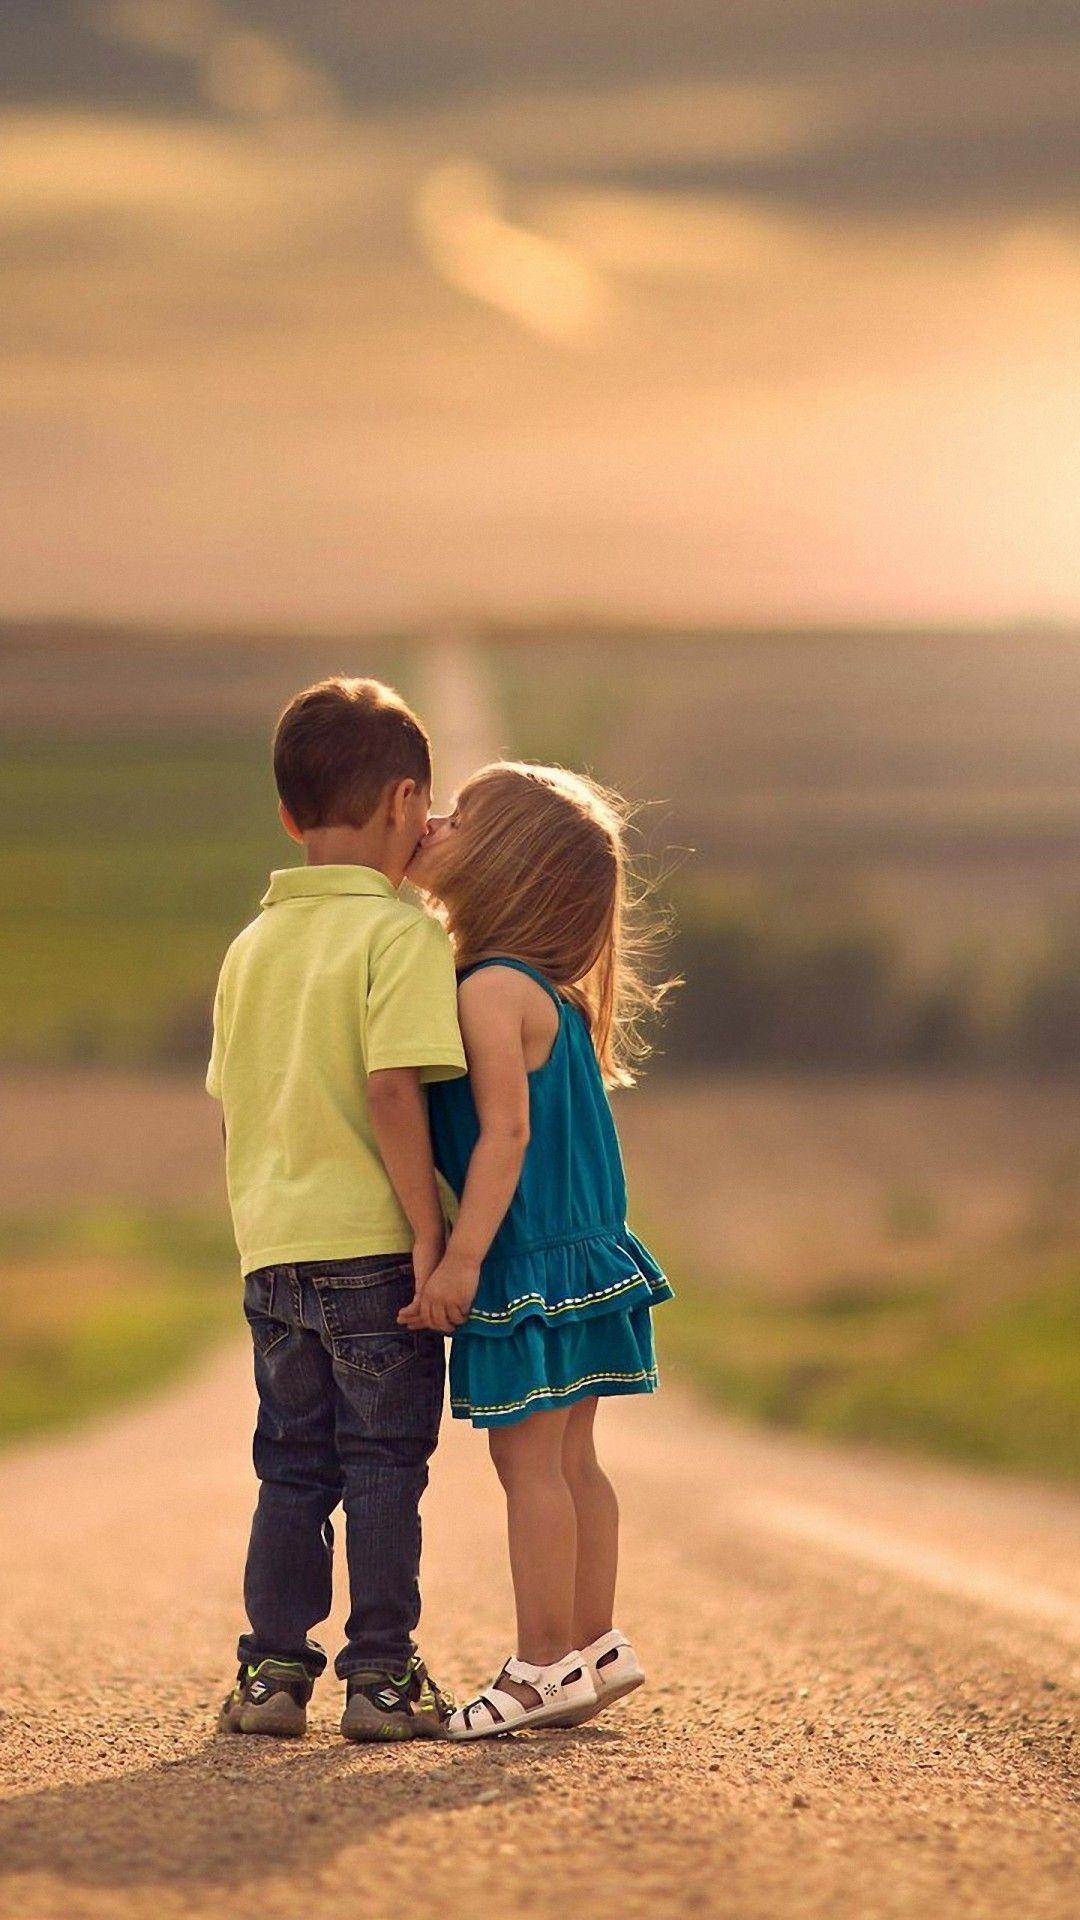 Baby Love Couple Hd Wallpapers Cute Kids Hd Wallpapers For Xiaomi